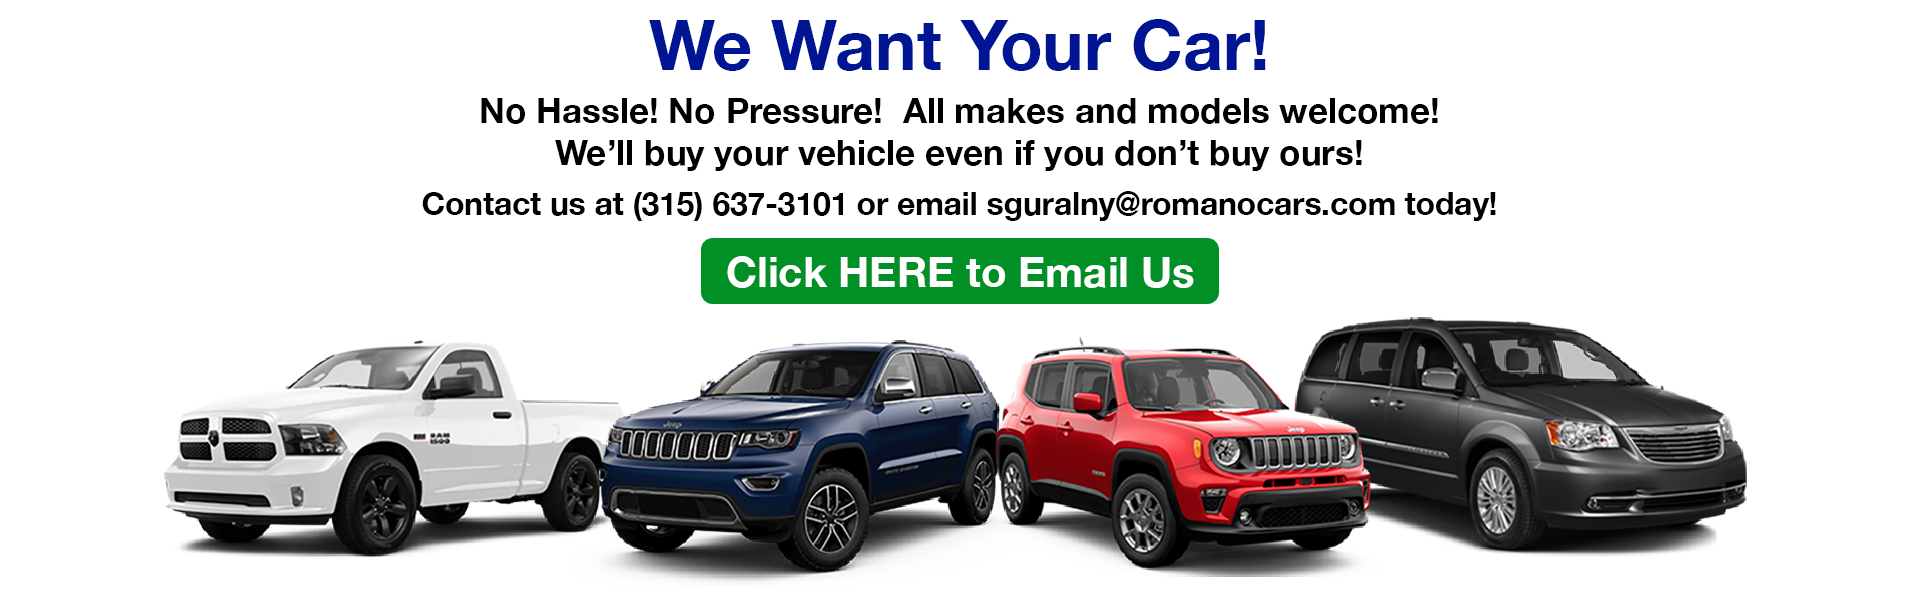 Romano Chrysler Jeep Wants Your Car!